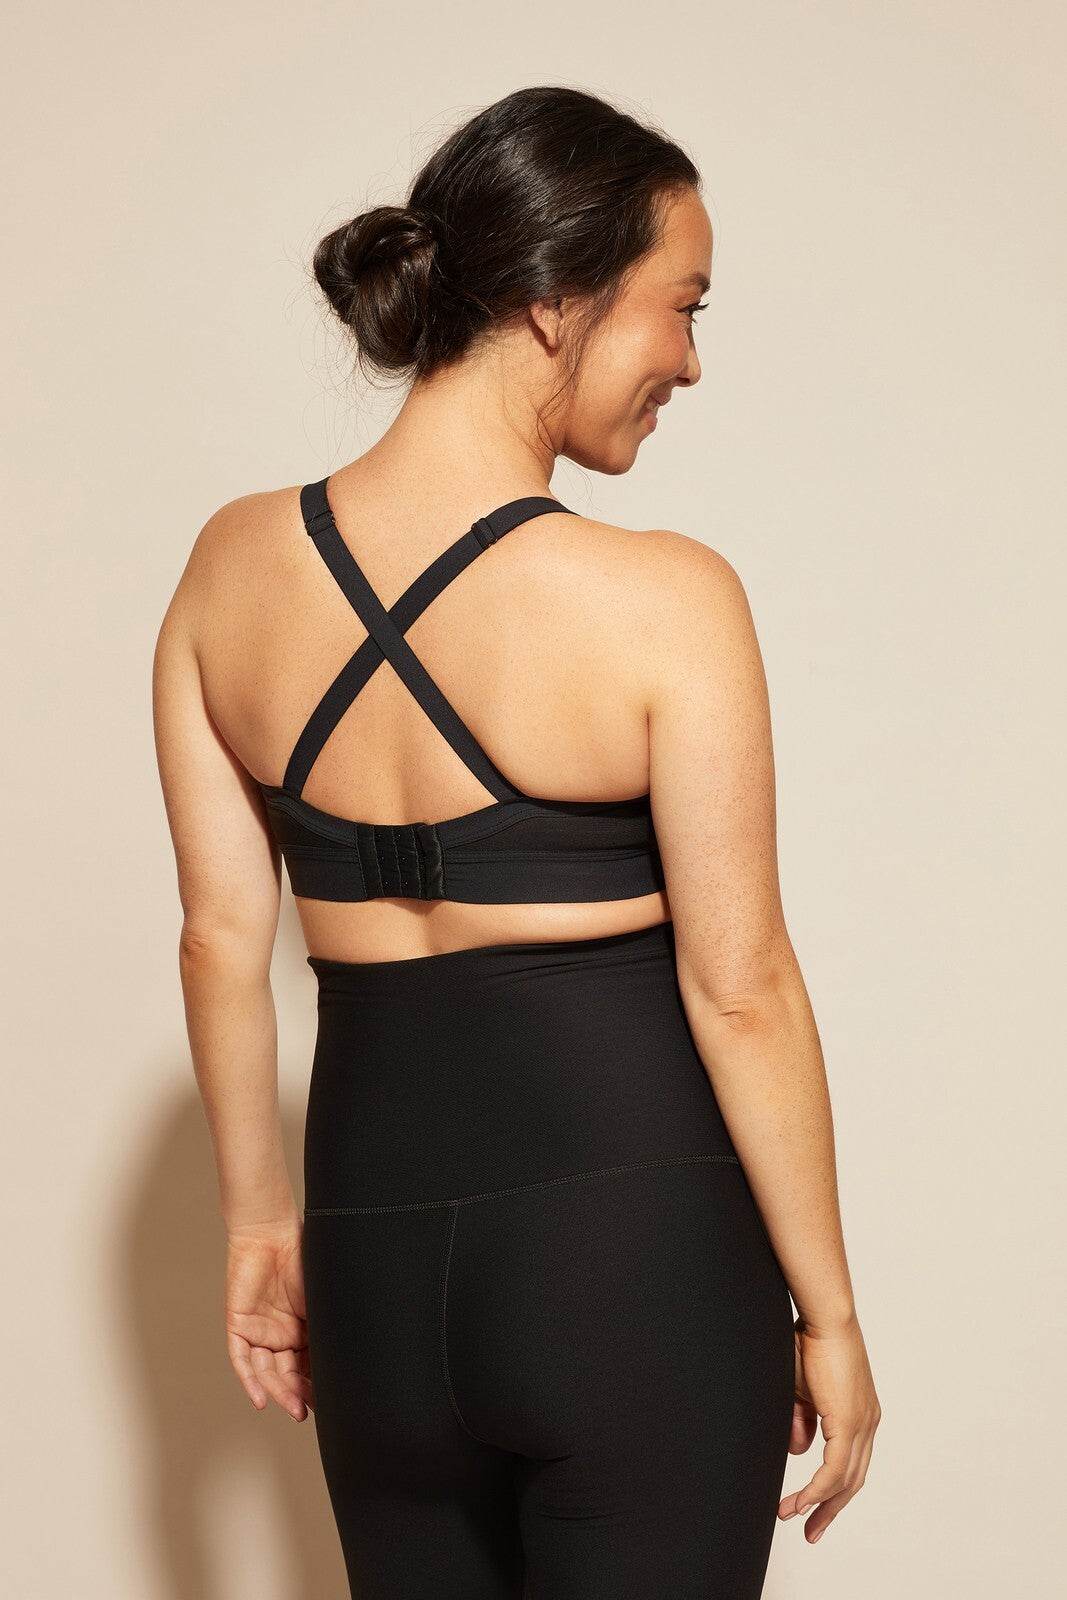 All the comfort of our hugely popular Chloe Crop, with easy front clips for nursing! This low to medium support crop is designed for everyday wear or low impact exercise like walking, yoga or pilates. You’ll soon be living in your Chloe Crop on days home with bub or when running errands! 